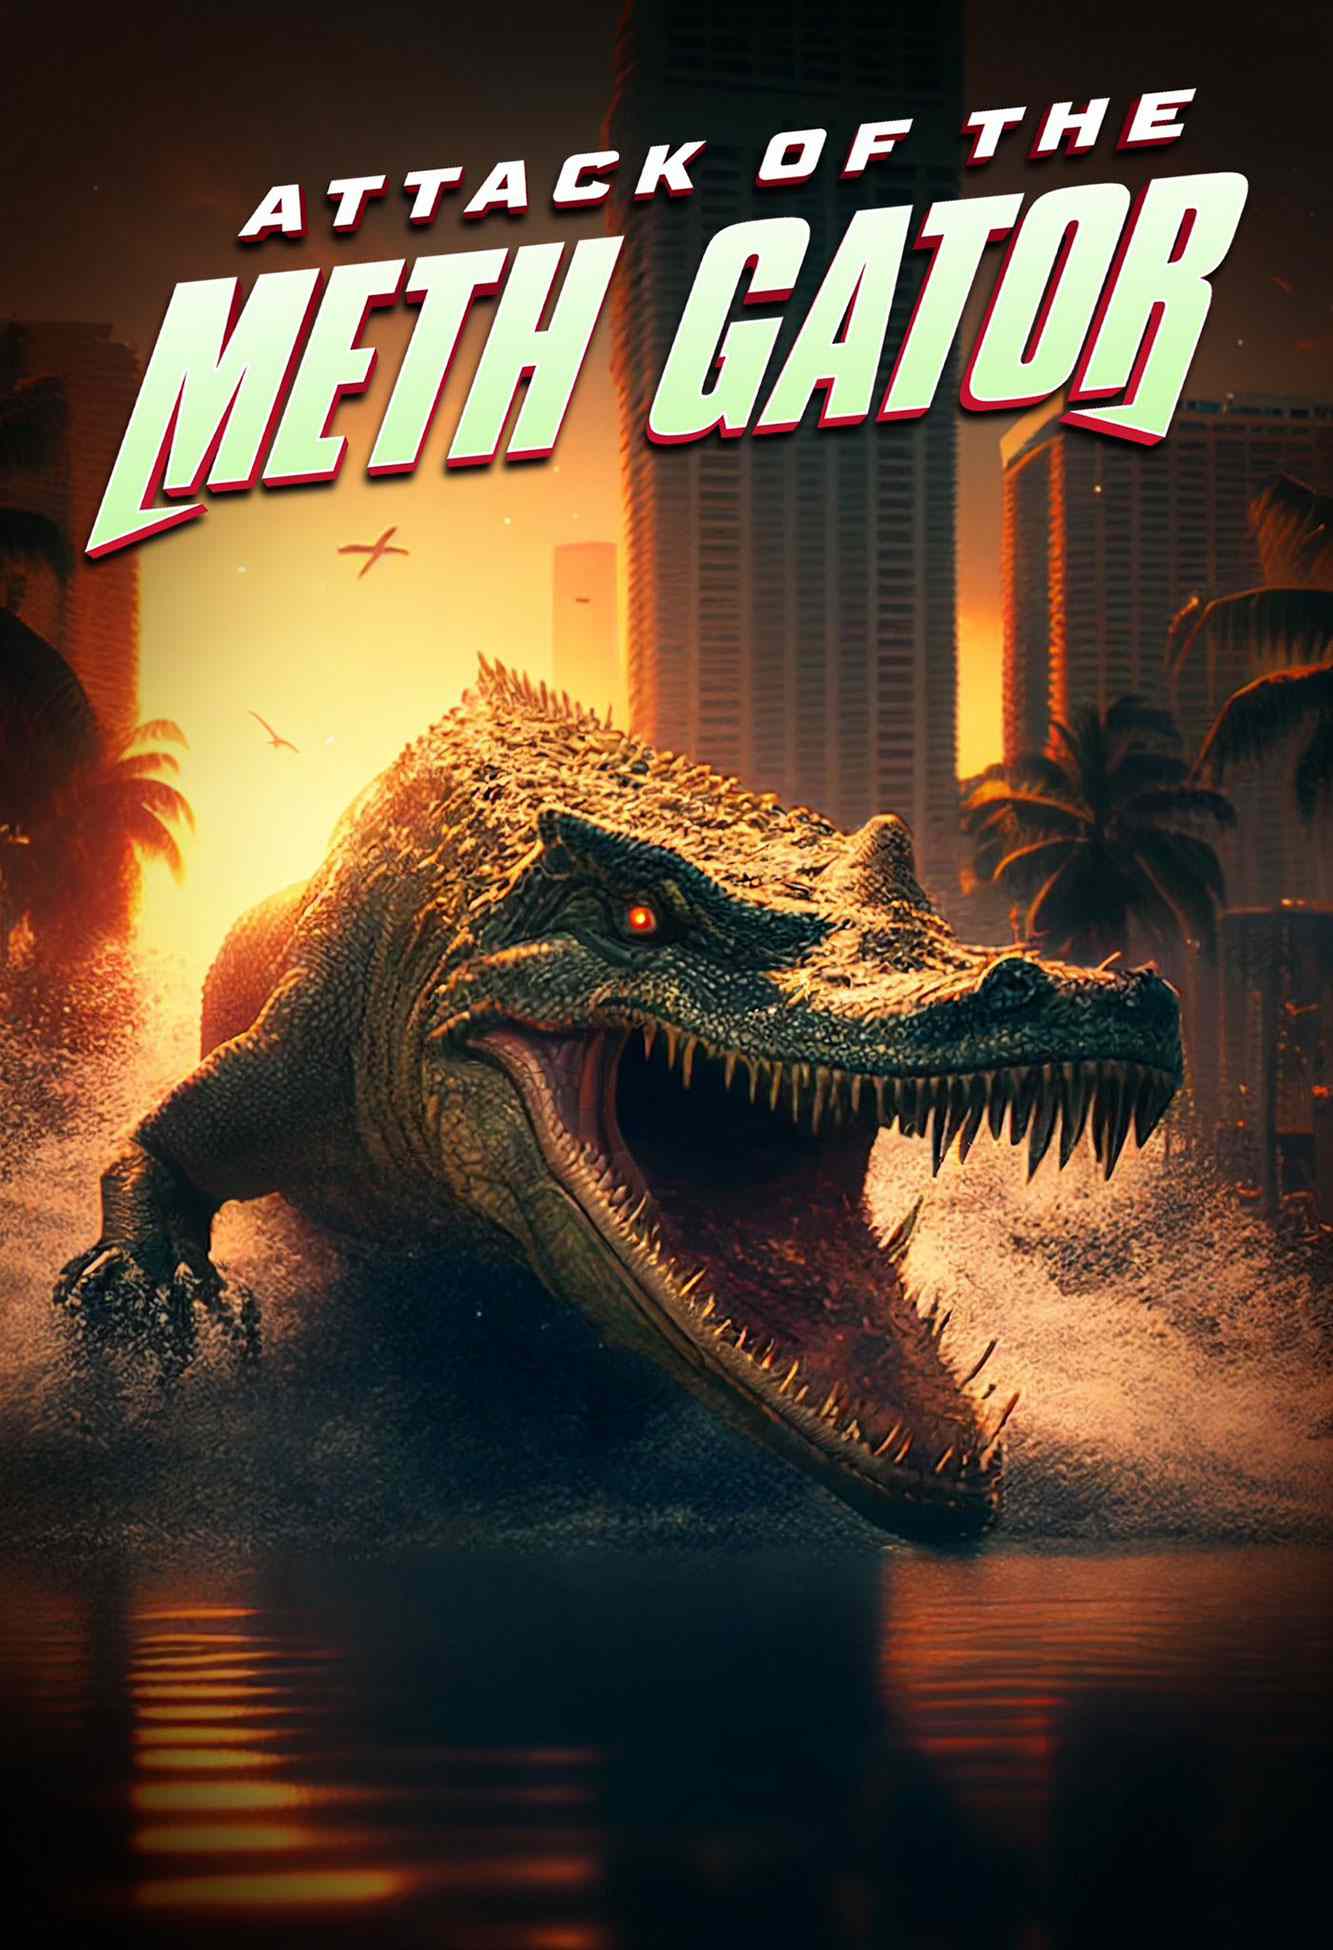 'Sharknado' producers to release 'Attack of the Meth Gator' this summer